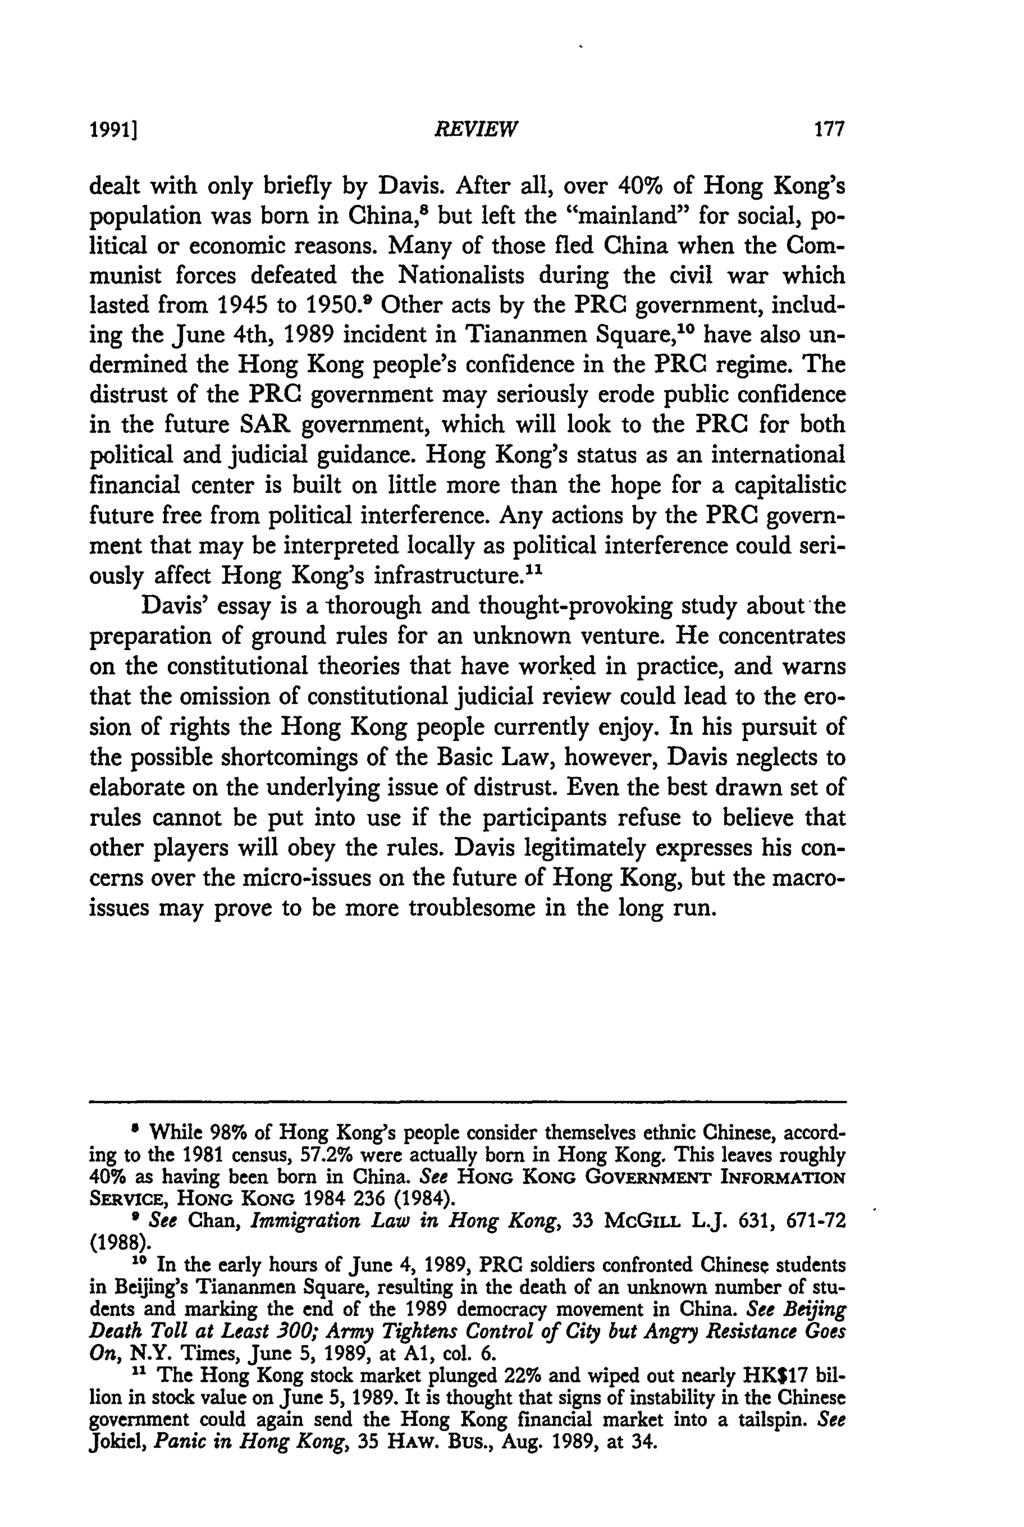 1991] REVIEW dealt with only briefly by Davis. After all, over 40% of Hong Kong's population was born in China, 8 but left the "mainland" for social, political or economic reasons.